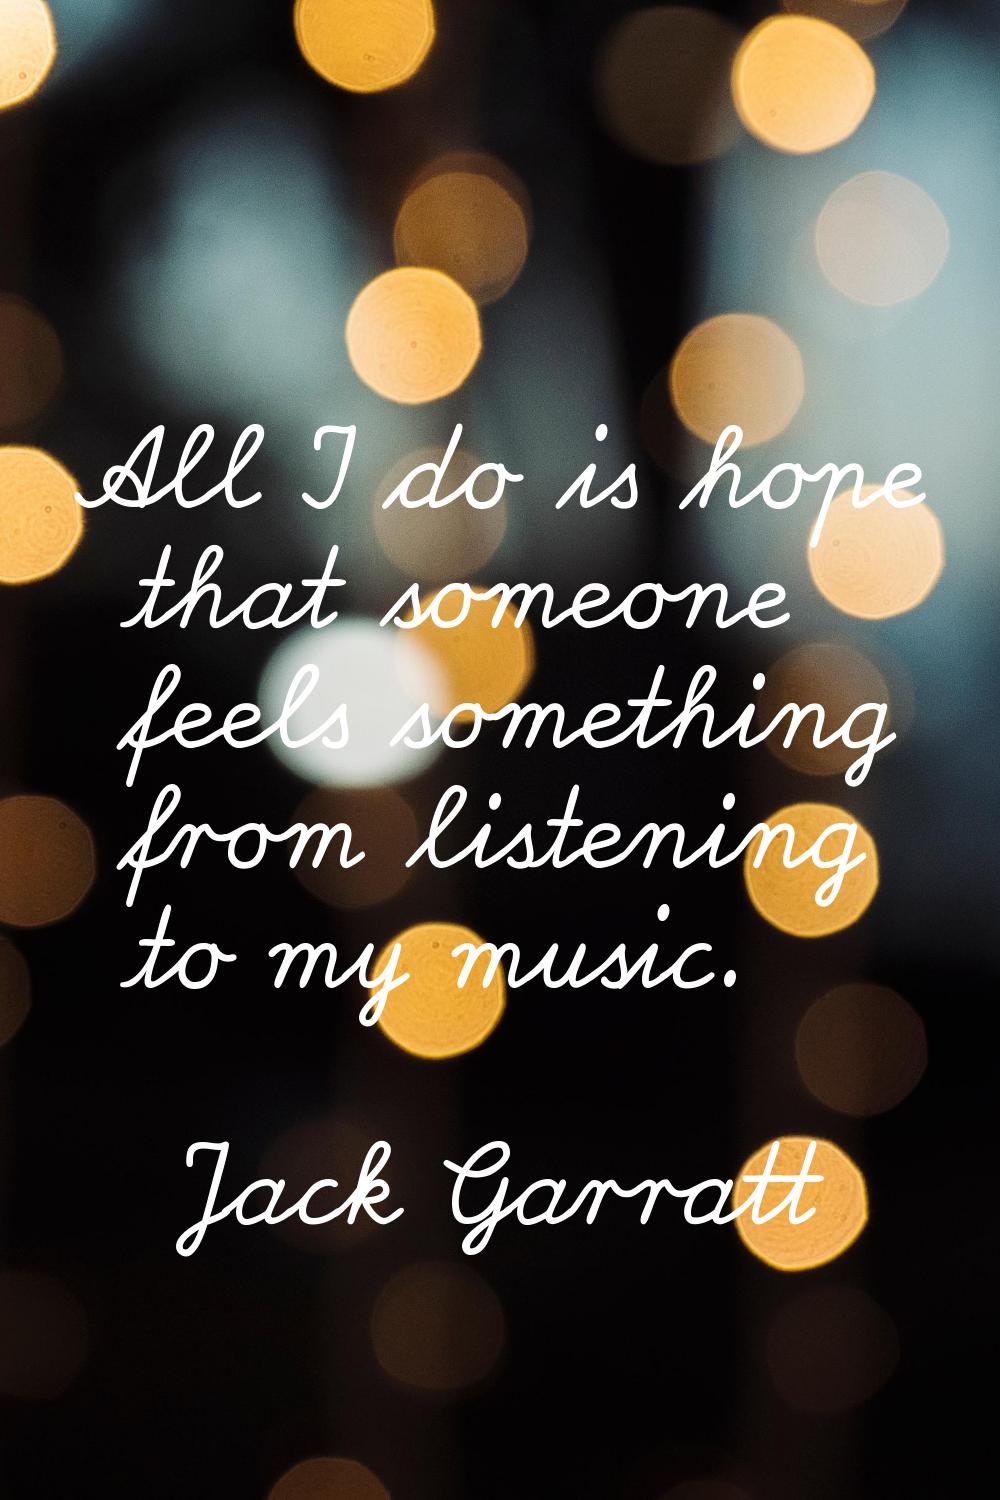 All I do is hope that someone feels something from listening to my music.